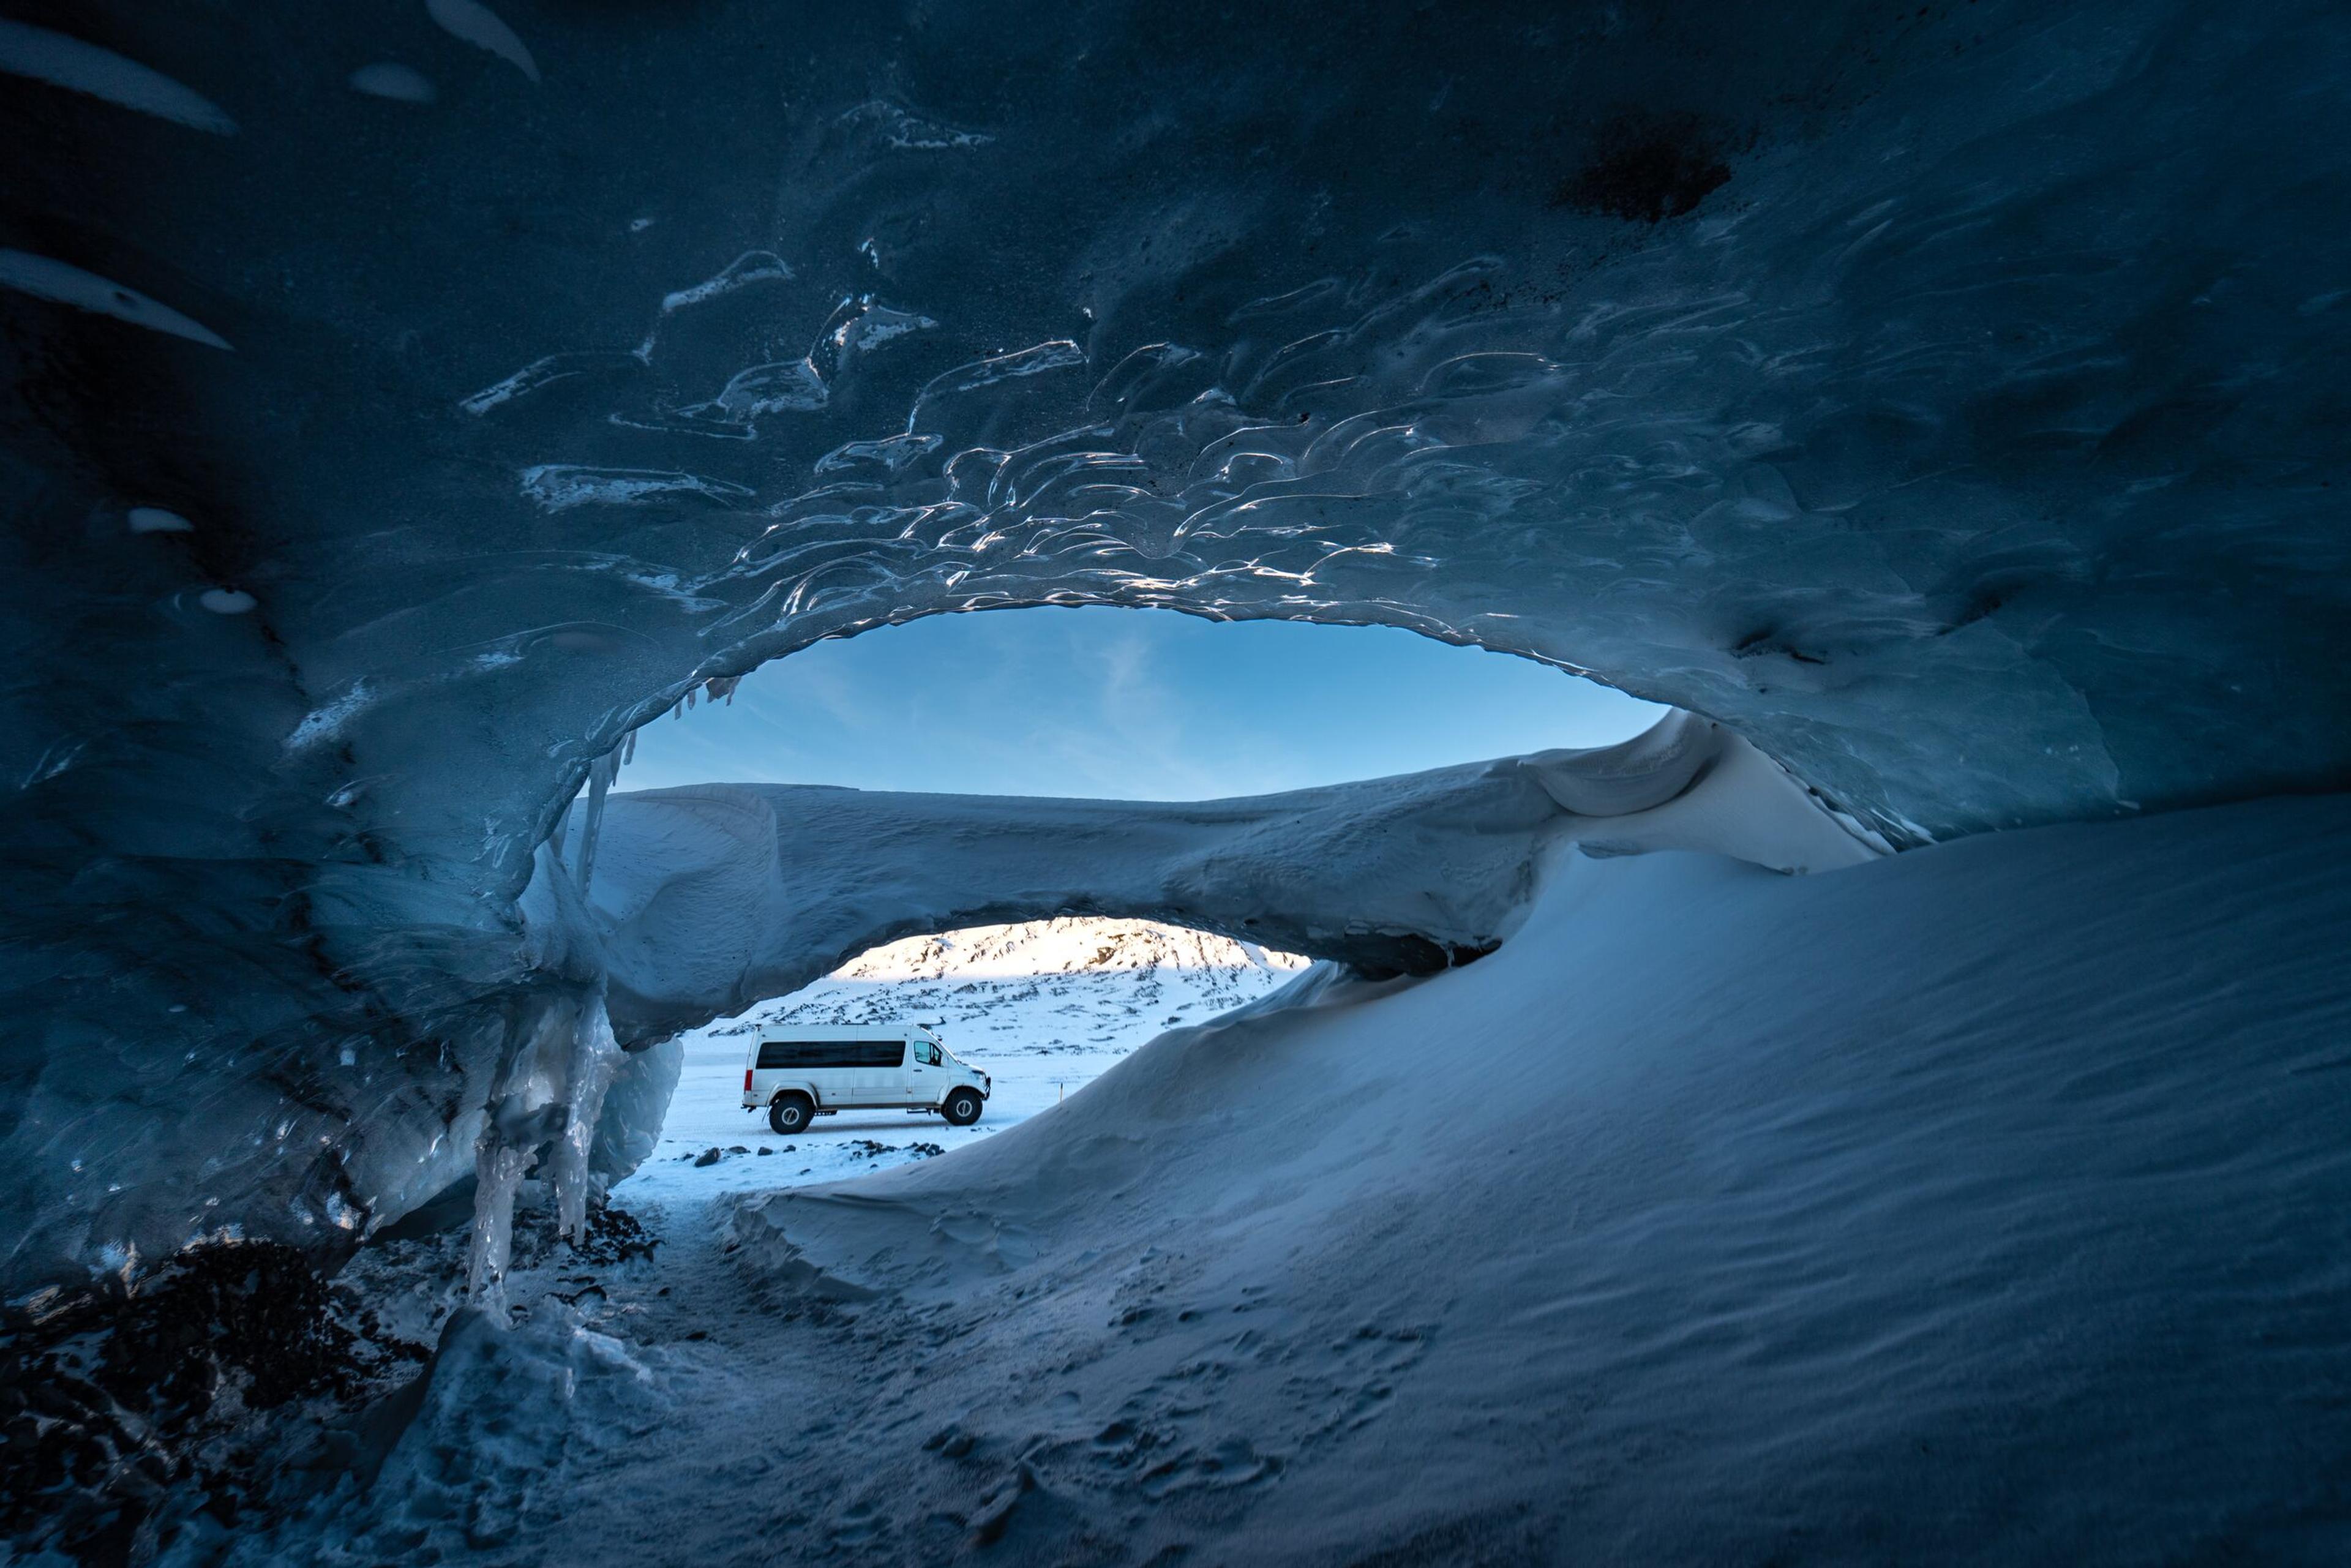 View from inside a blue ice cave, showing a vehicle parked in the snowy landscape outside.